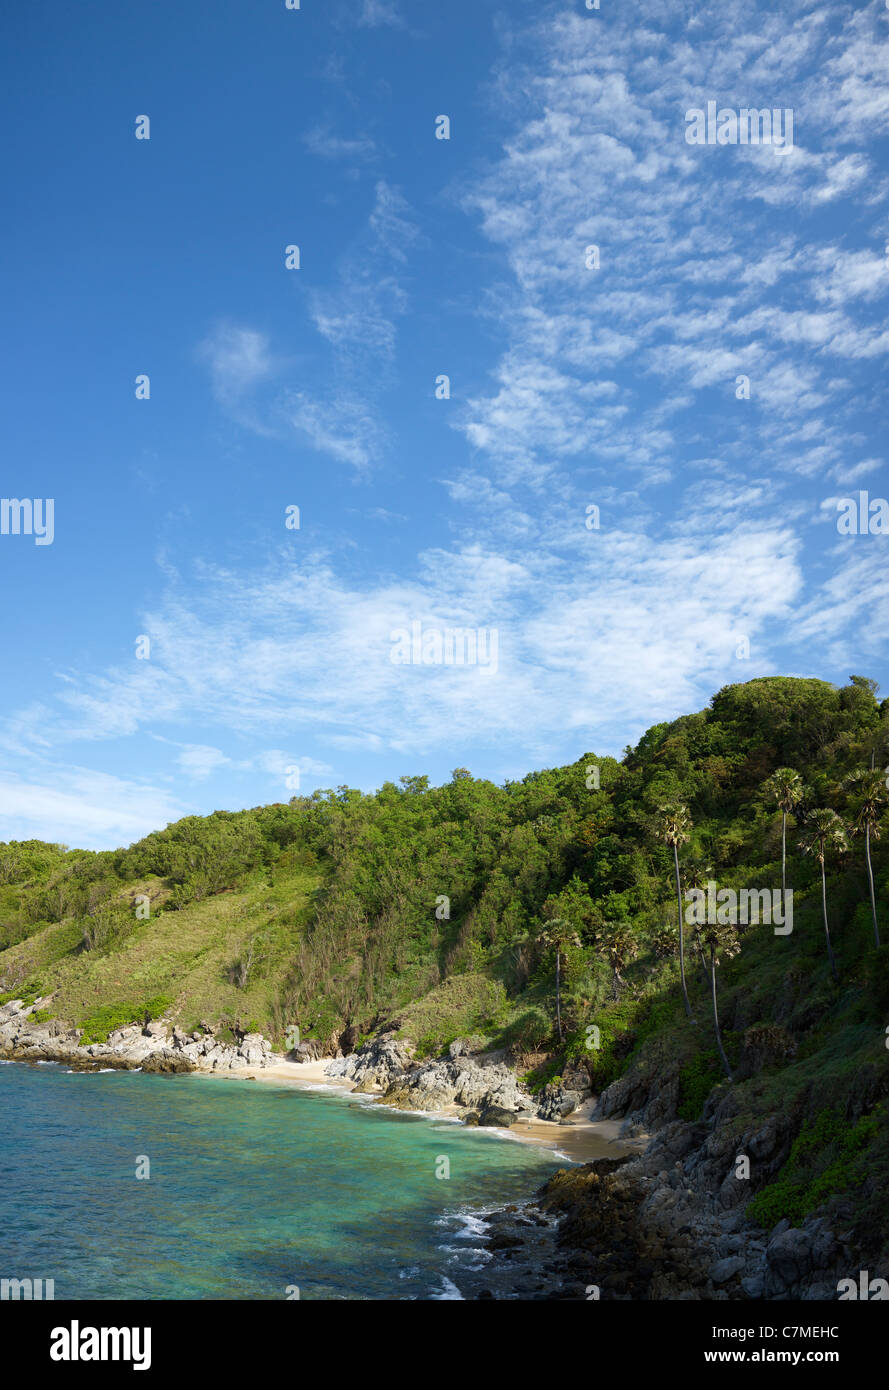 Idyllic tropical beach. Vertical composition in high resolution. Stock Photo